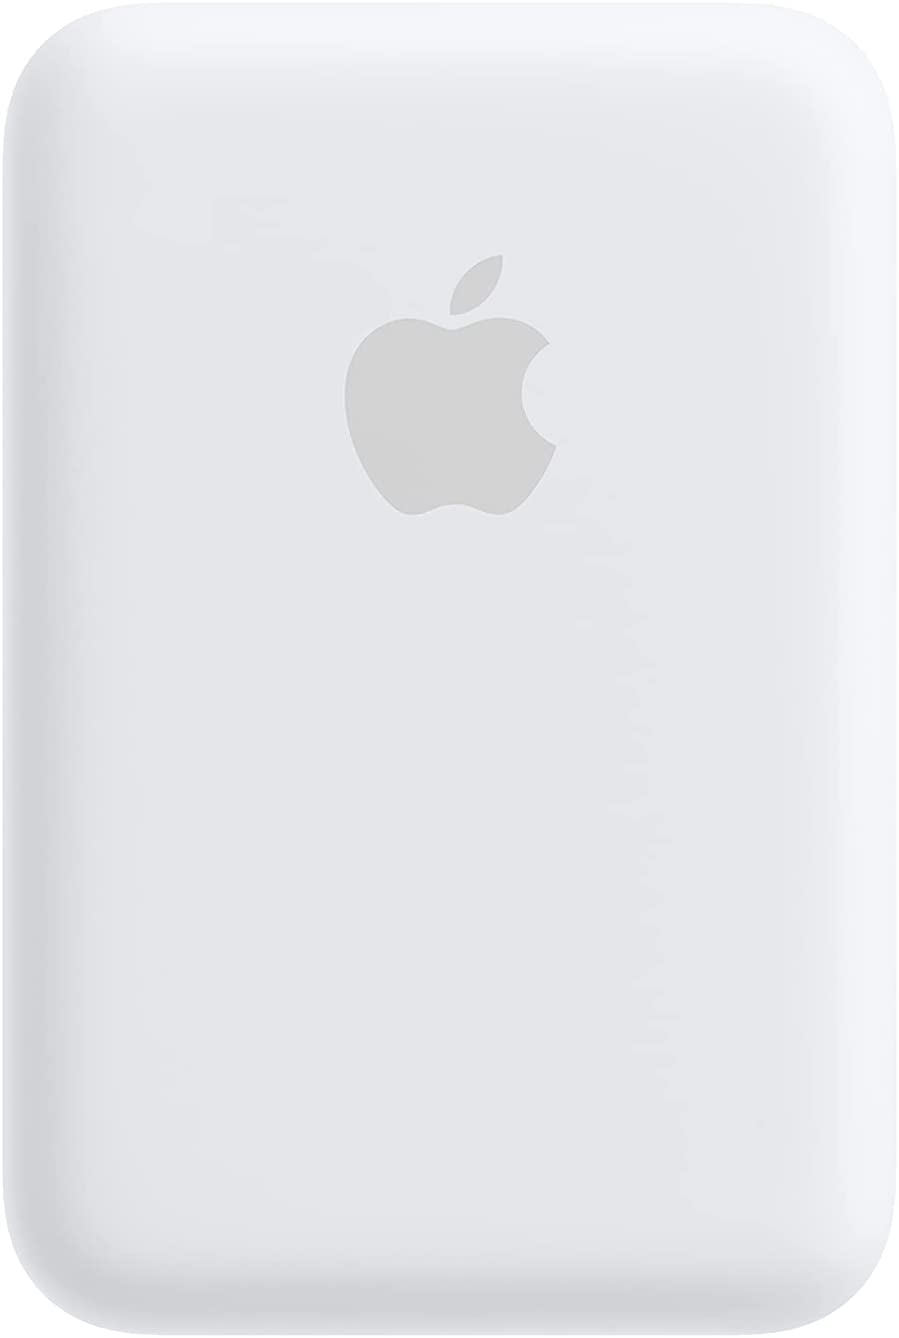 Apple MagSafe Battery Pack - White (Certified Refurbished)